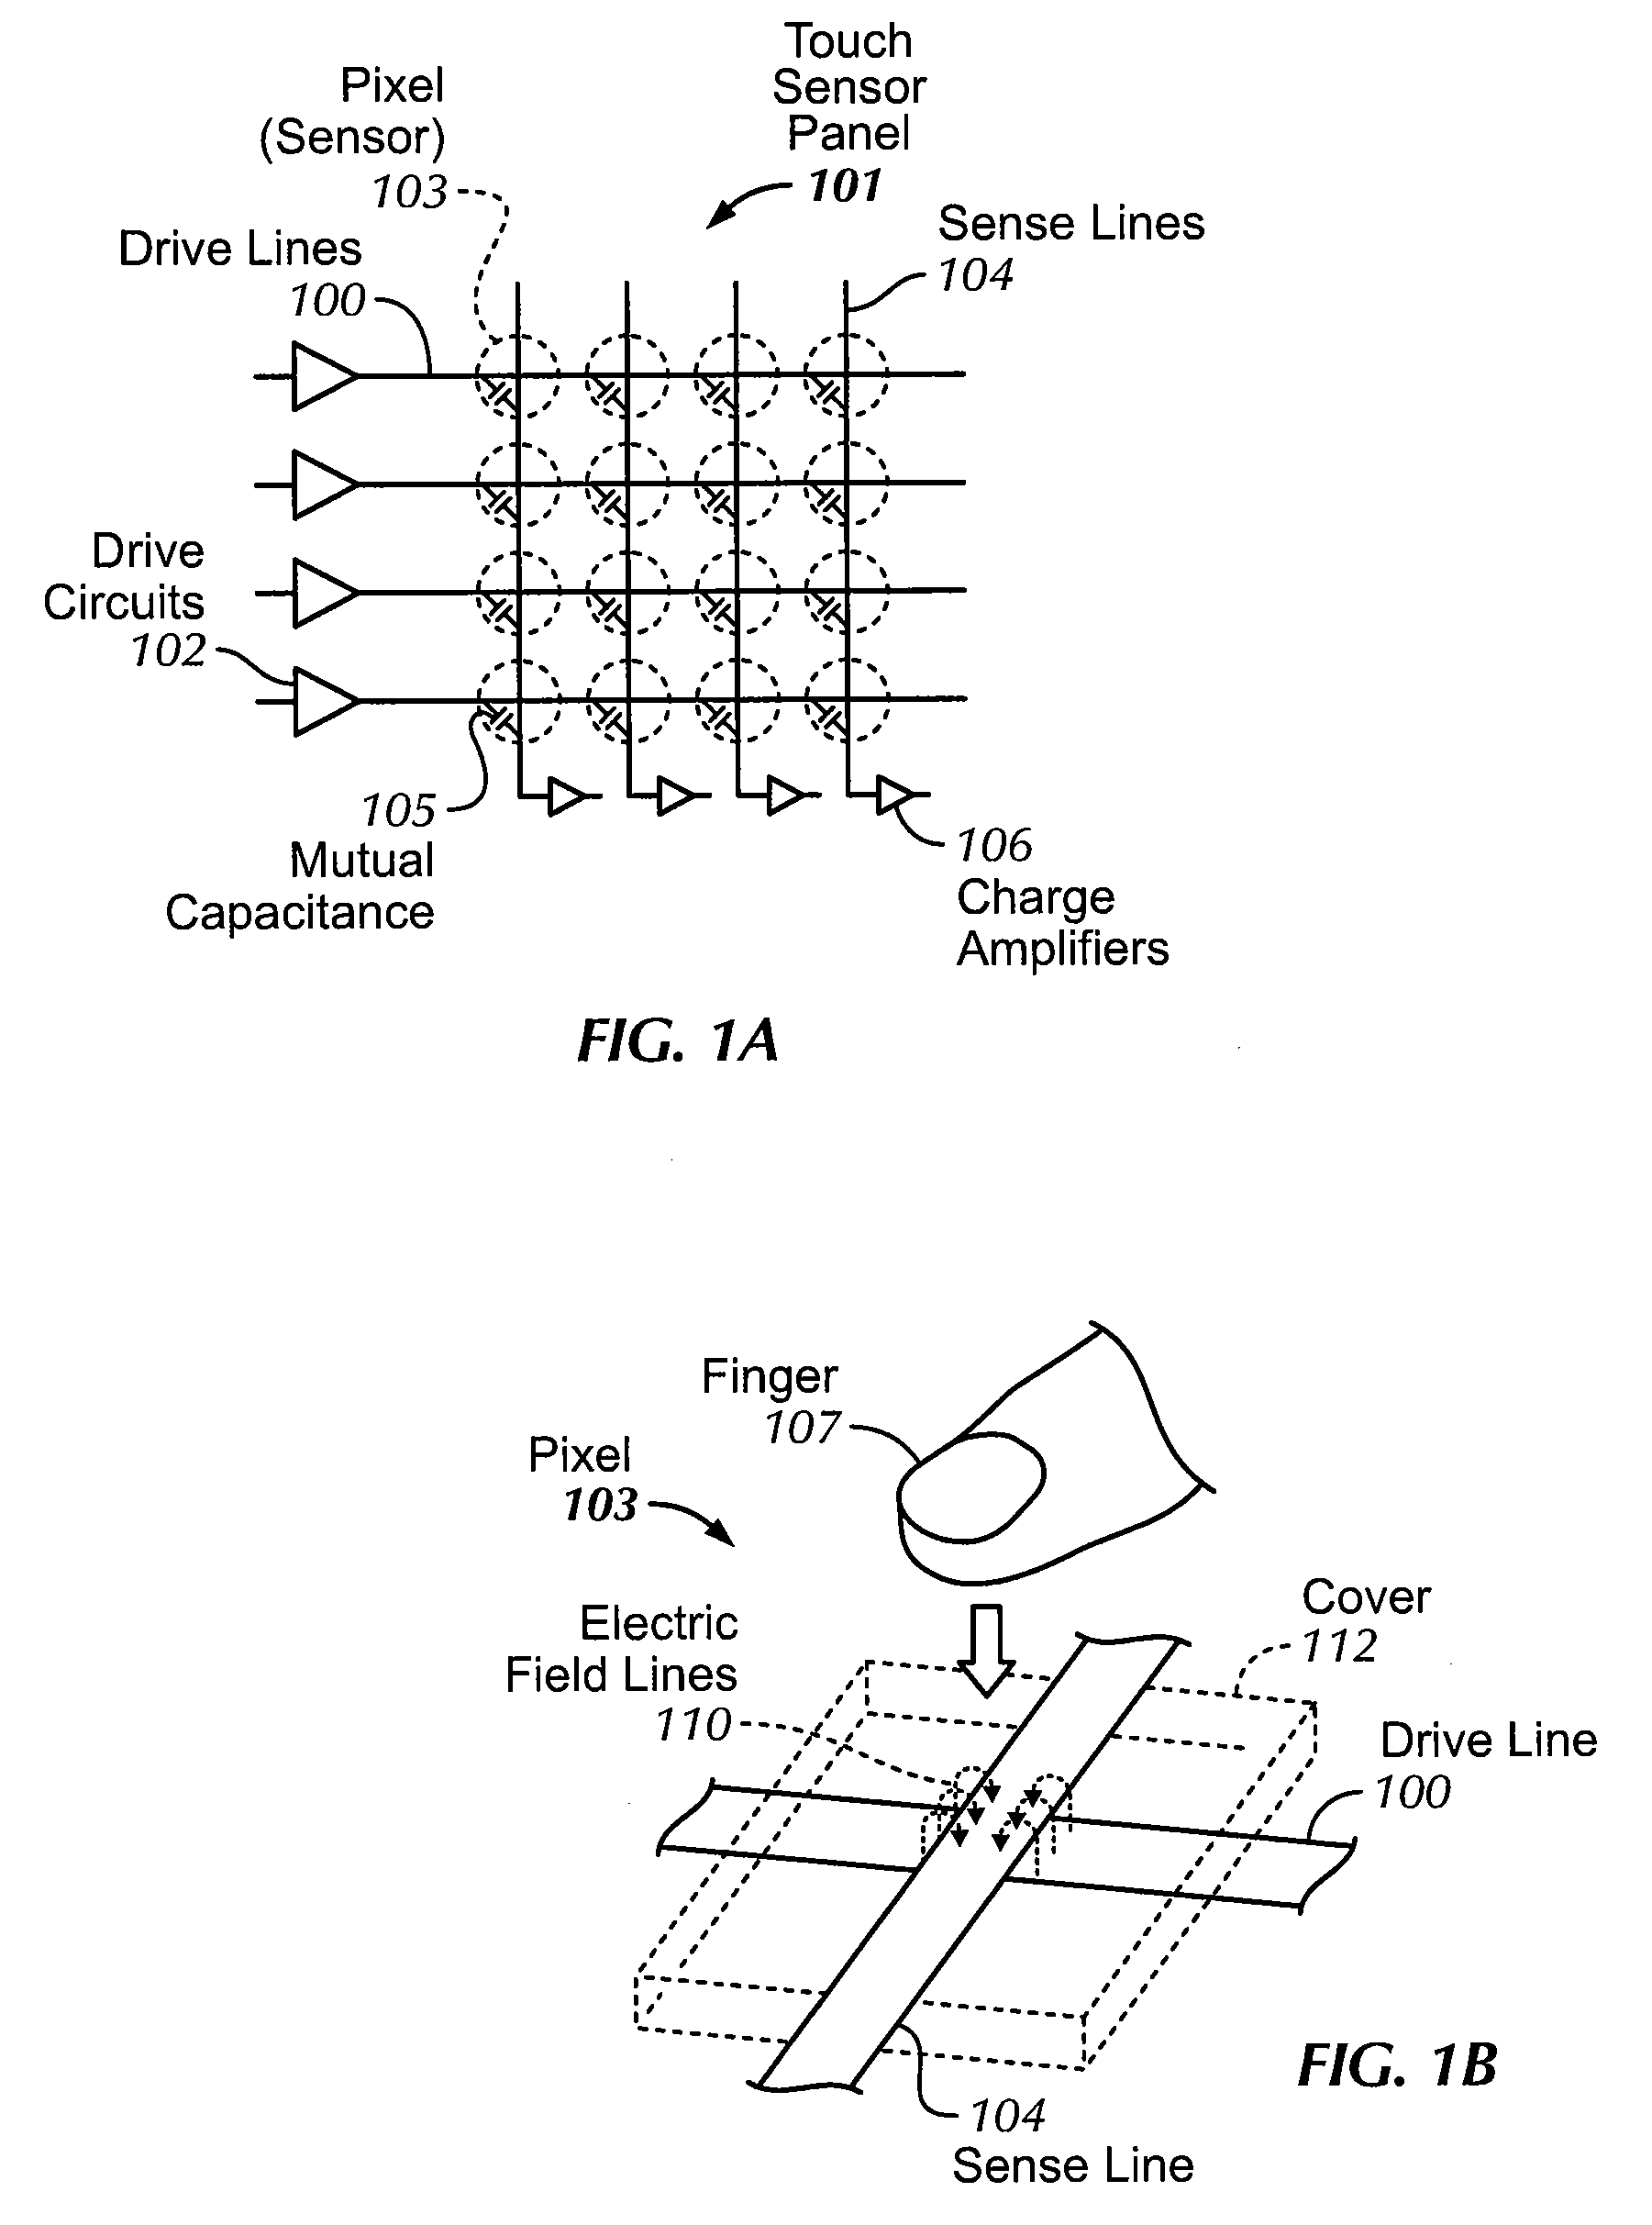 Method for rapidly testing capacitance sensing array fault conditions